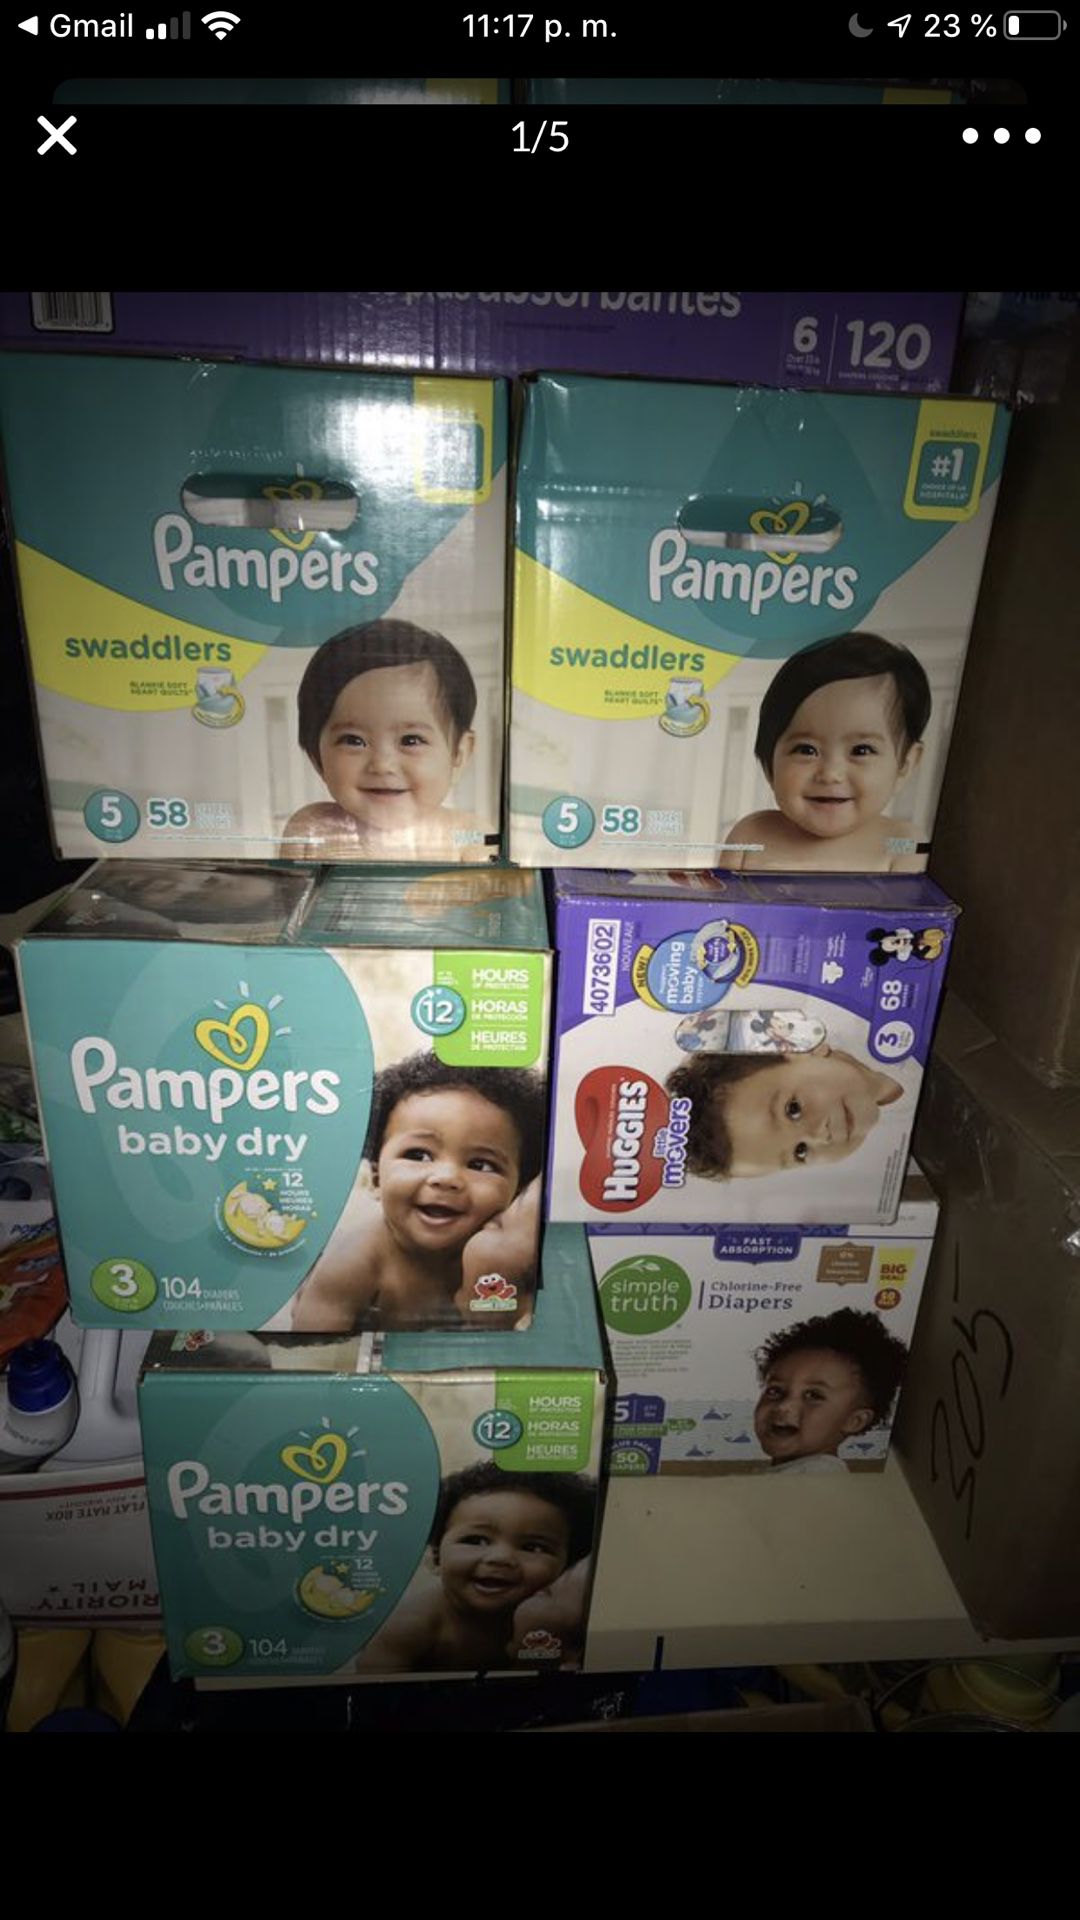 Pampers $20.00 box